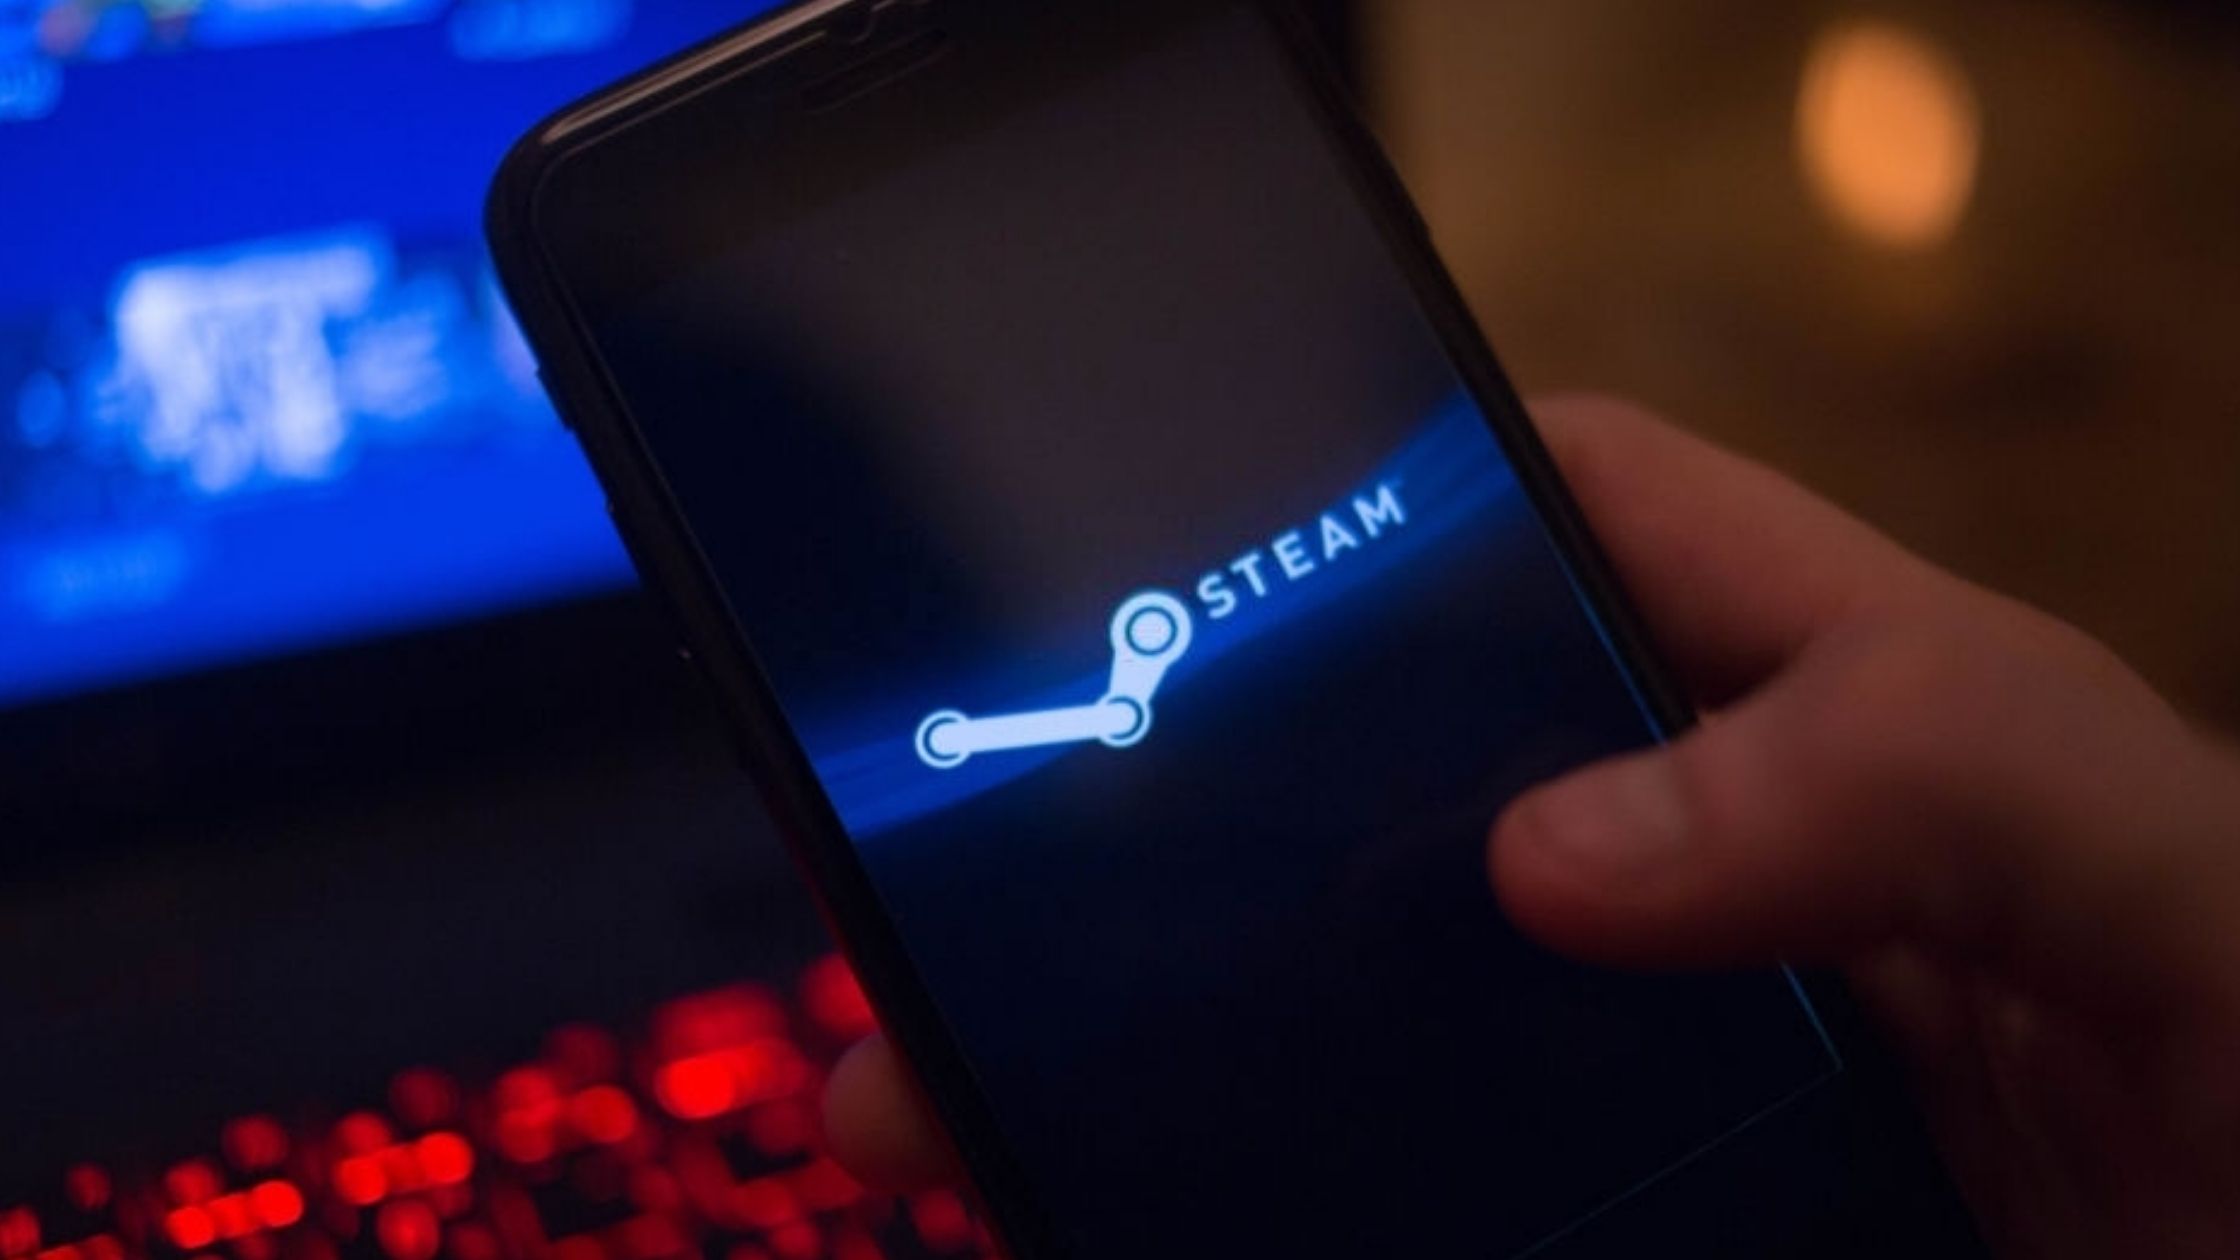 Featured image for the article Steam error code 118 - how to fix it